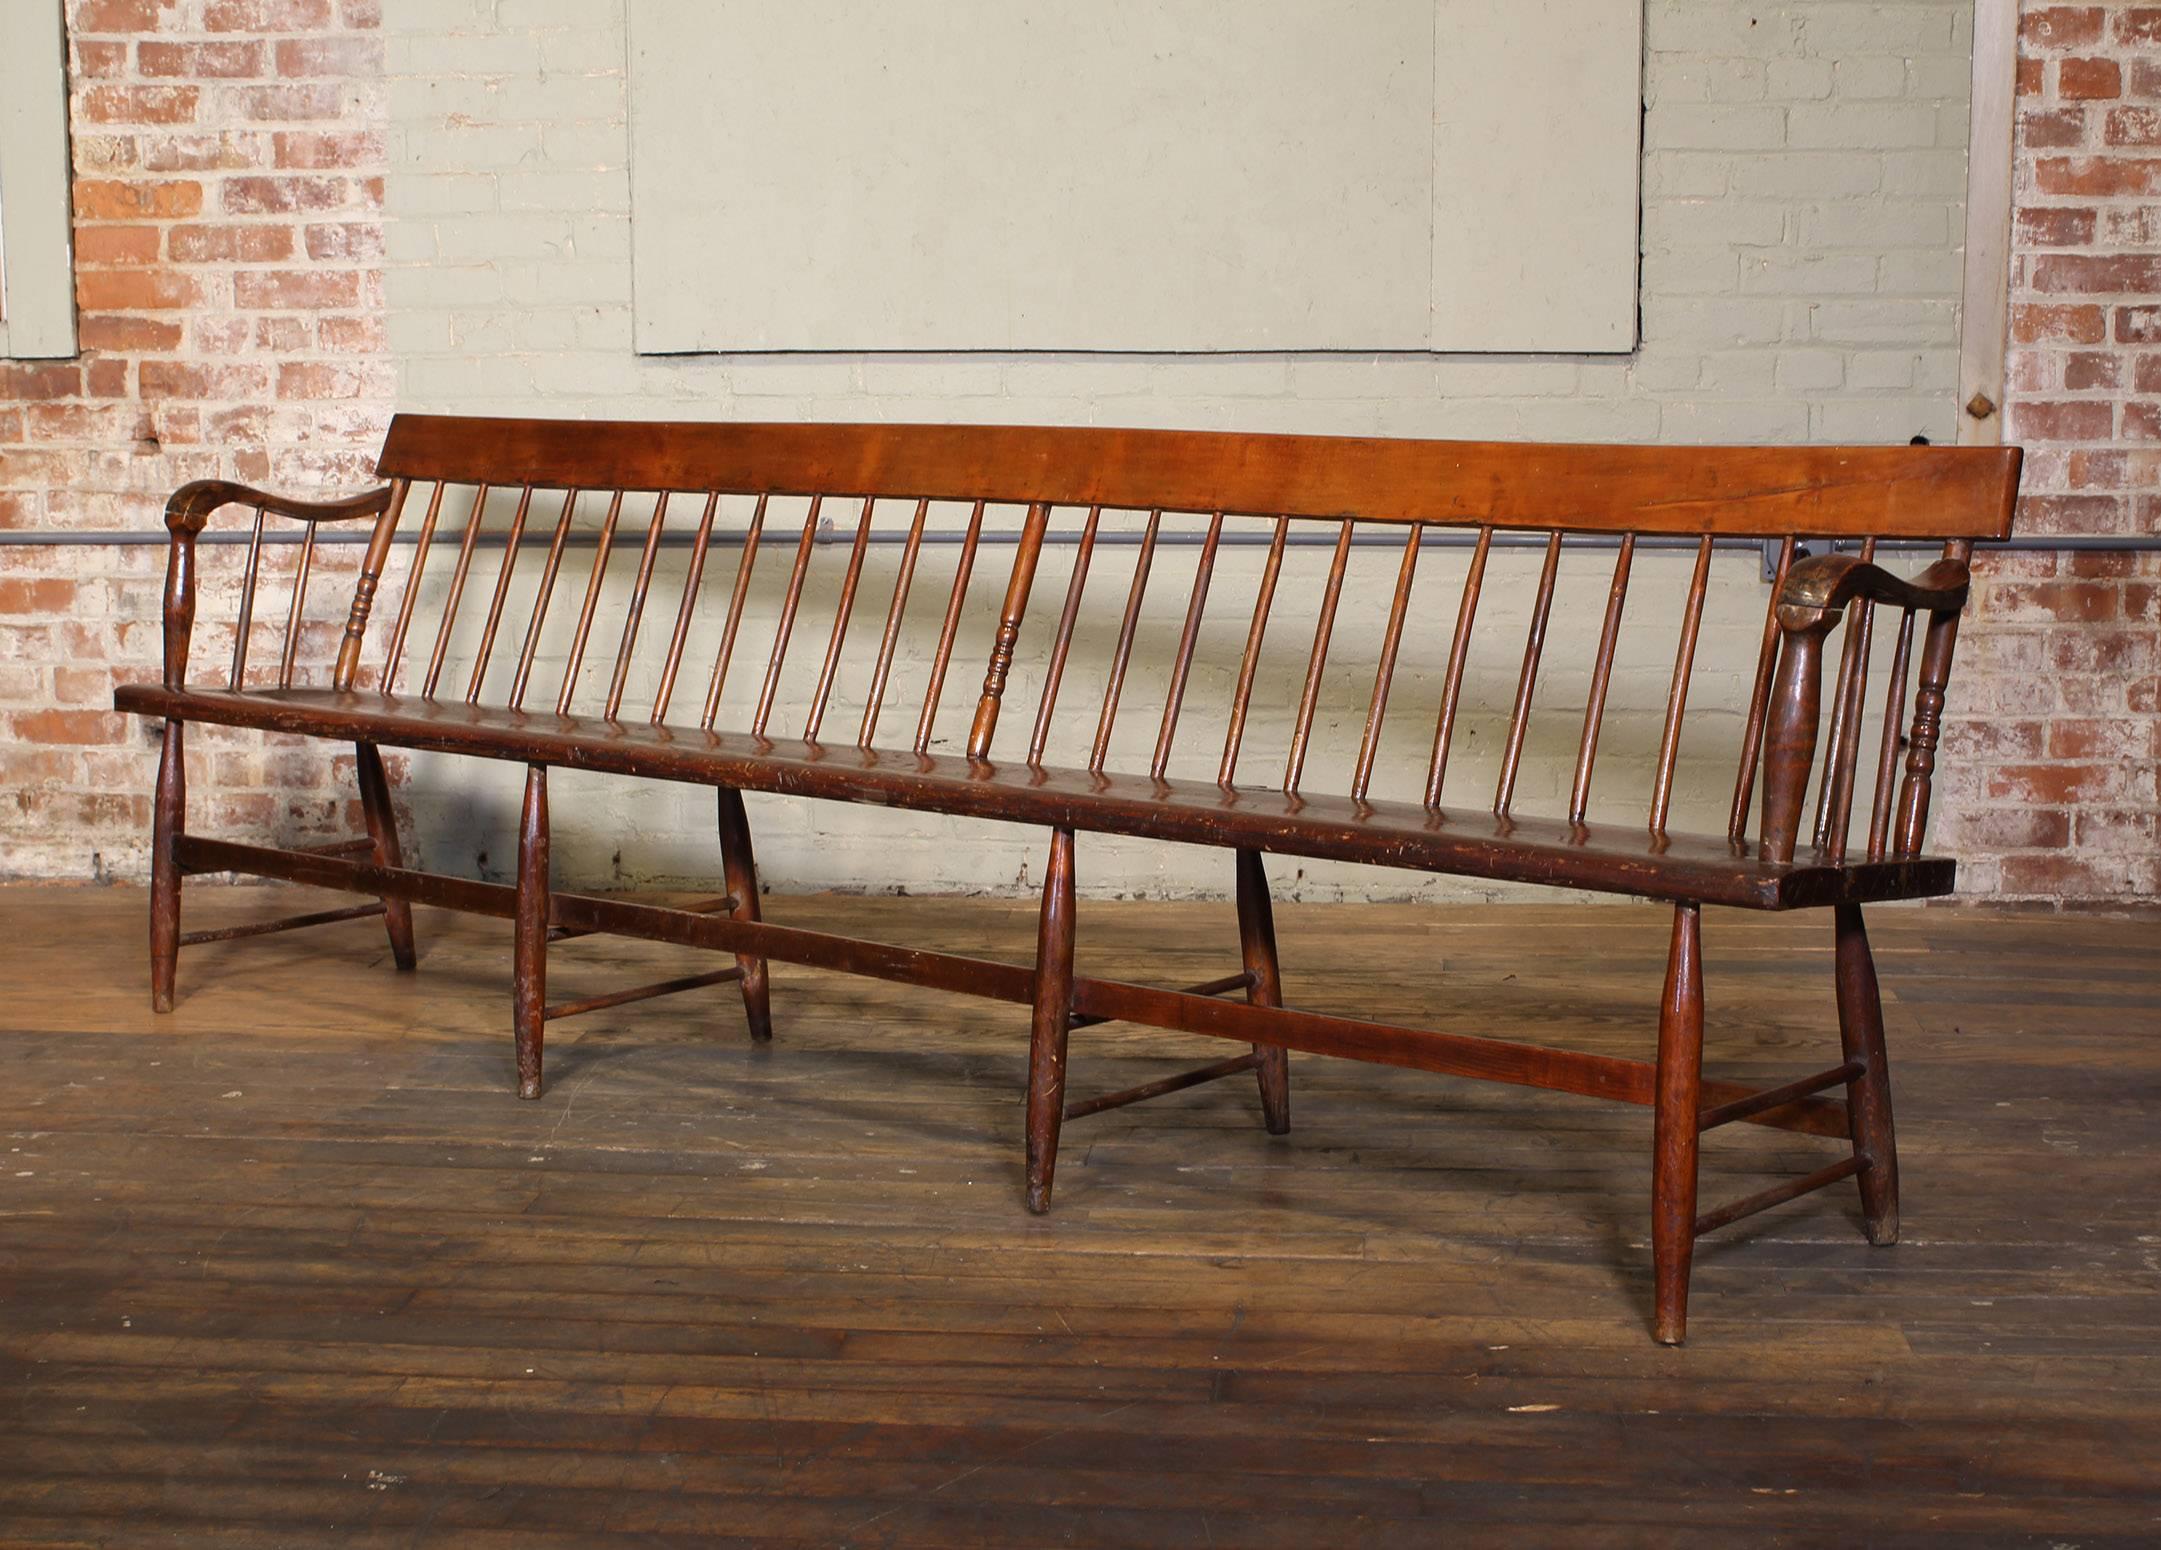 Windsor deacon's style wooden bench. Measures 96